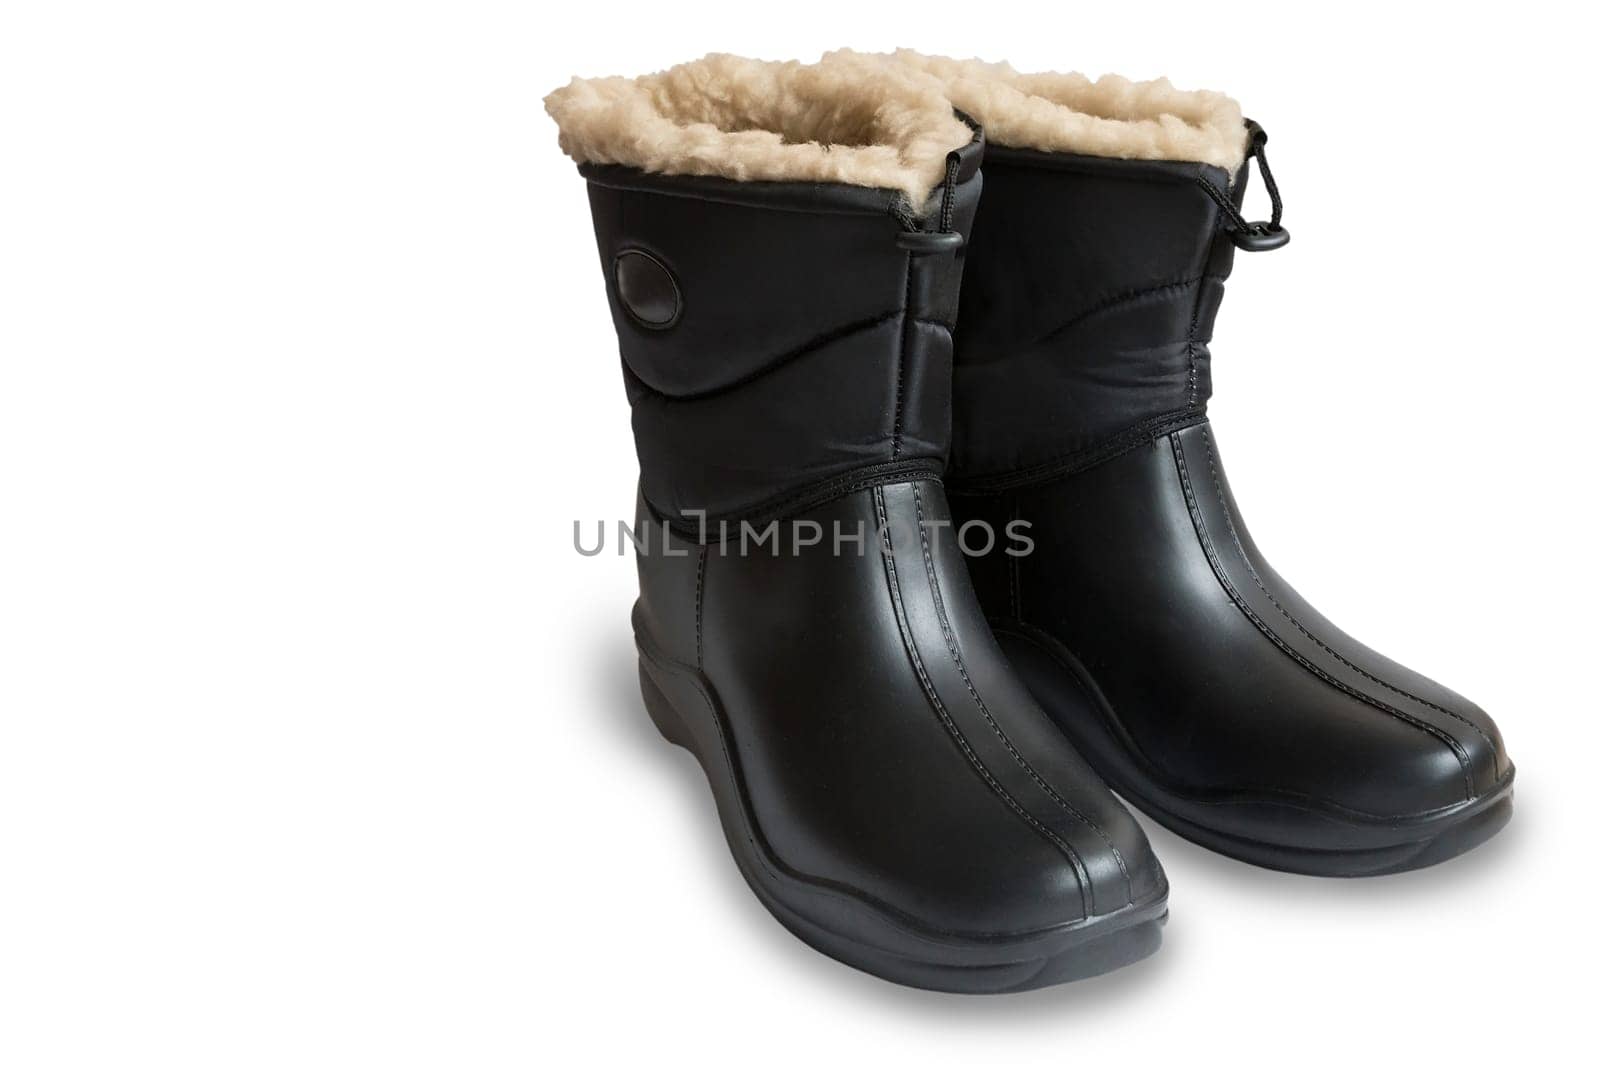 On a white background presents a warm waterproof men's boots for work or fishing.